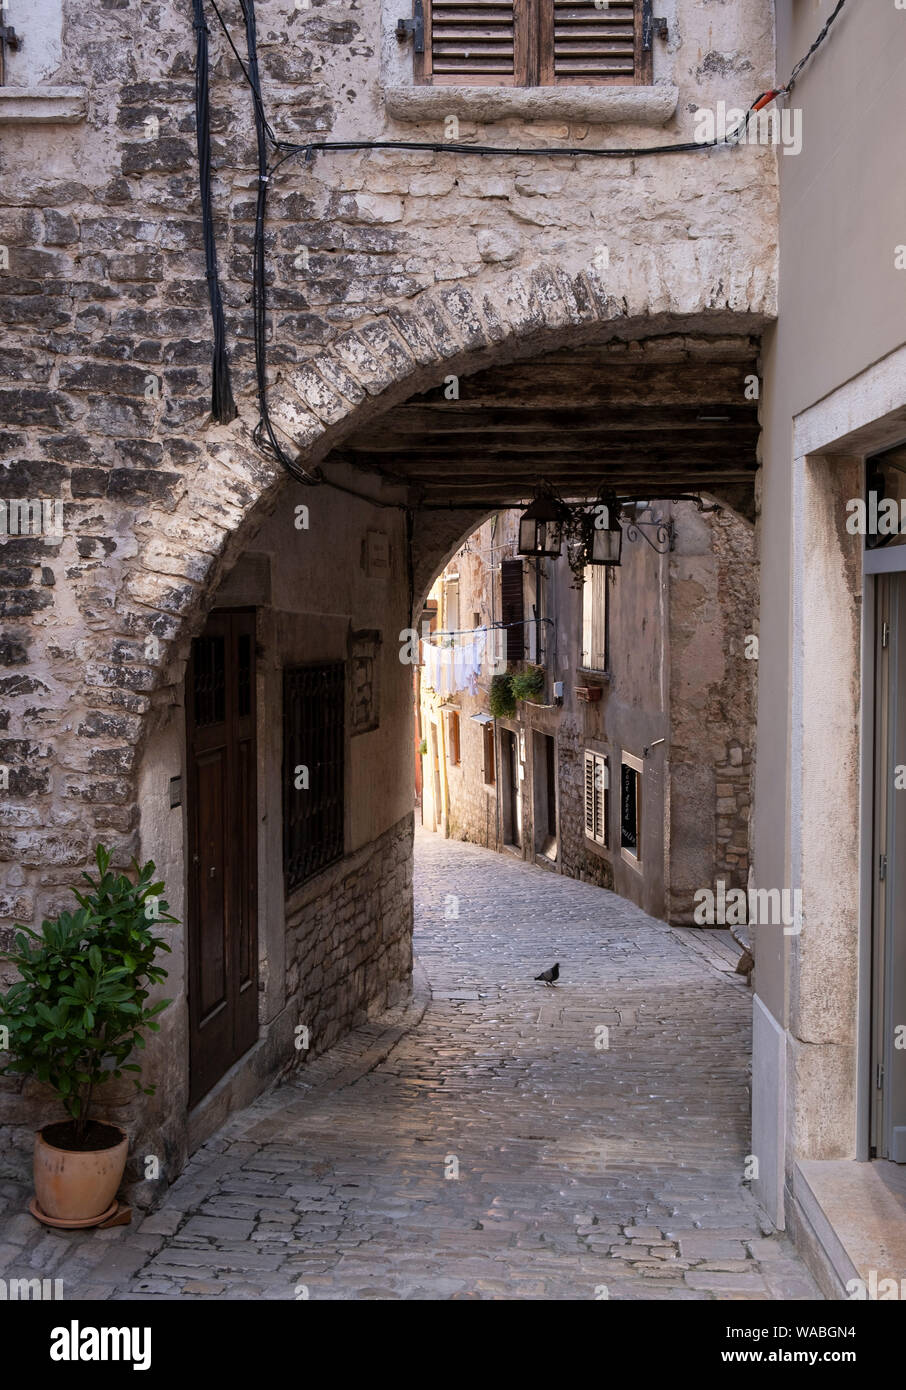 View of empty alley in the old town of Rovinj, Istria, Croatia Stock Photo